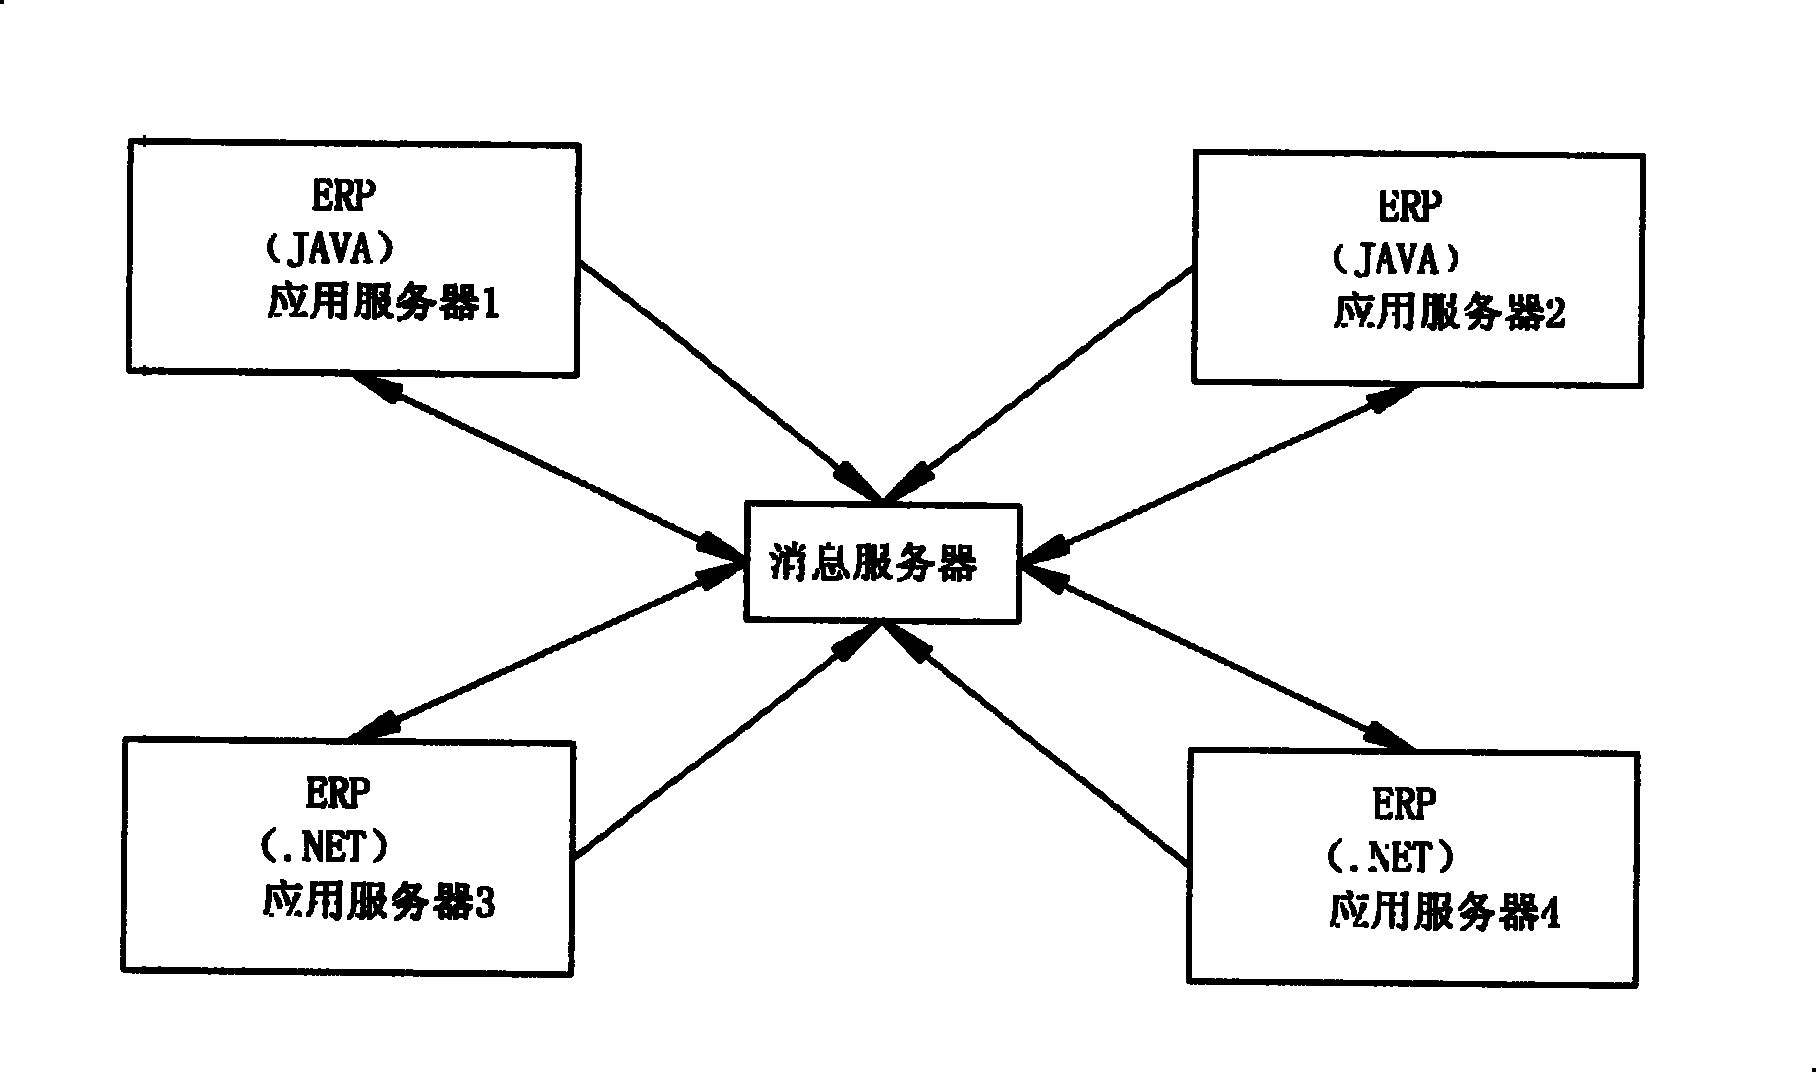 Communication method for transmitting message among systems